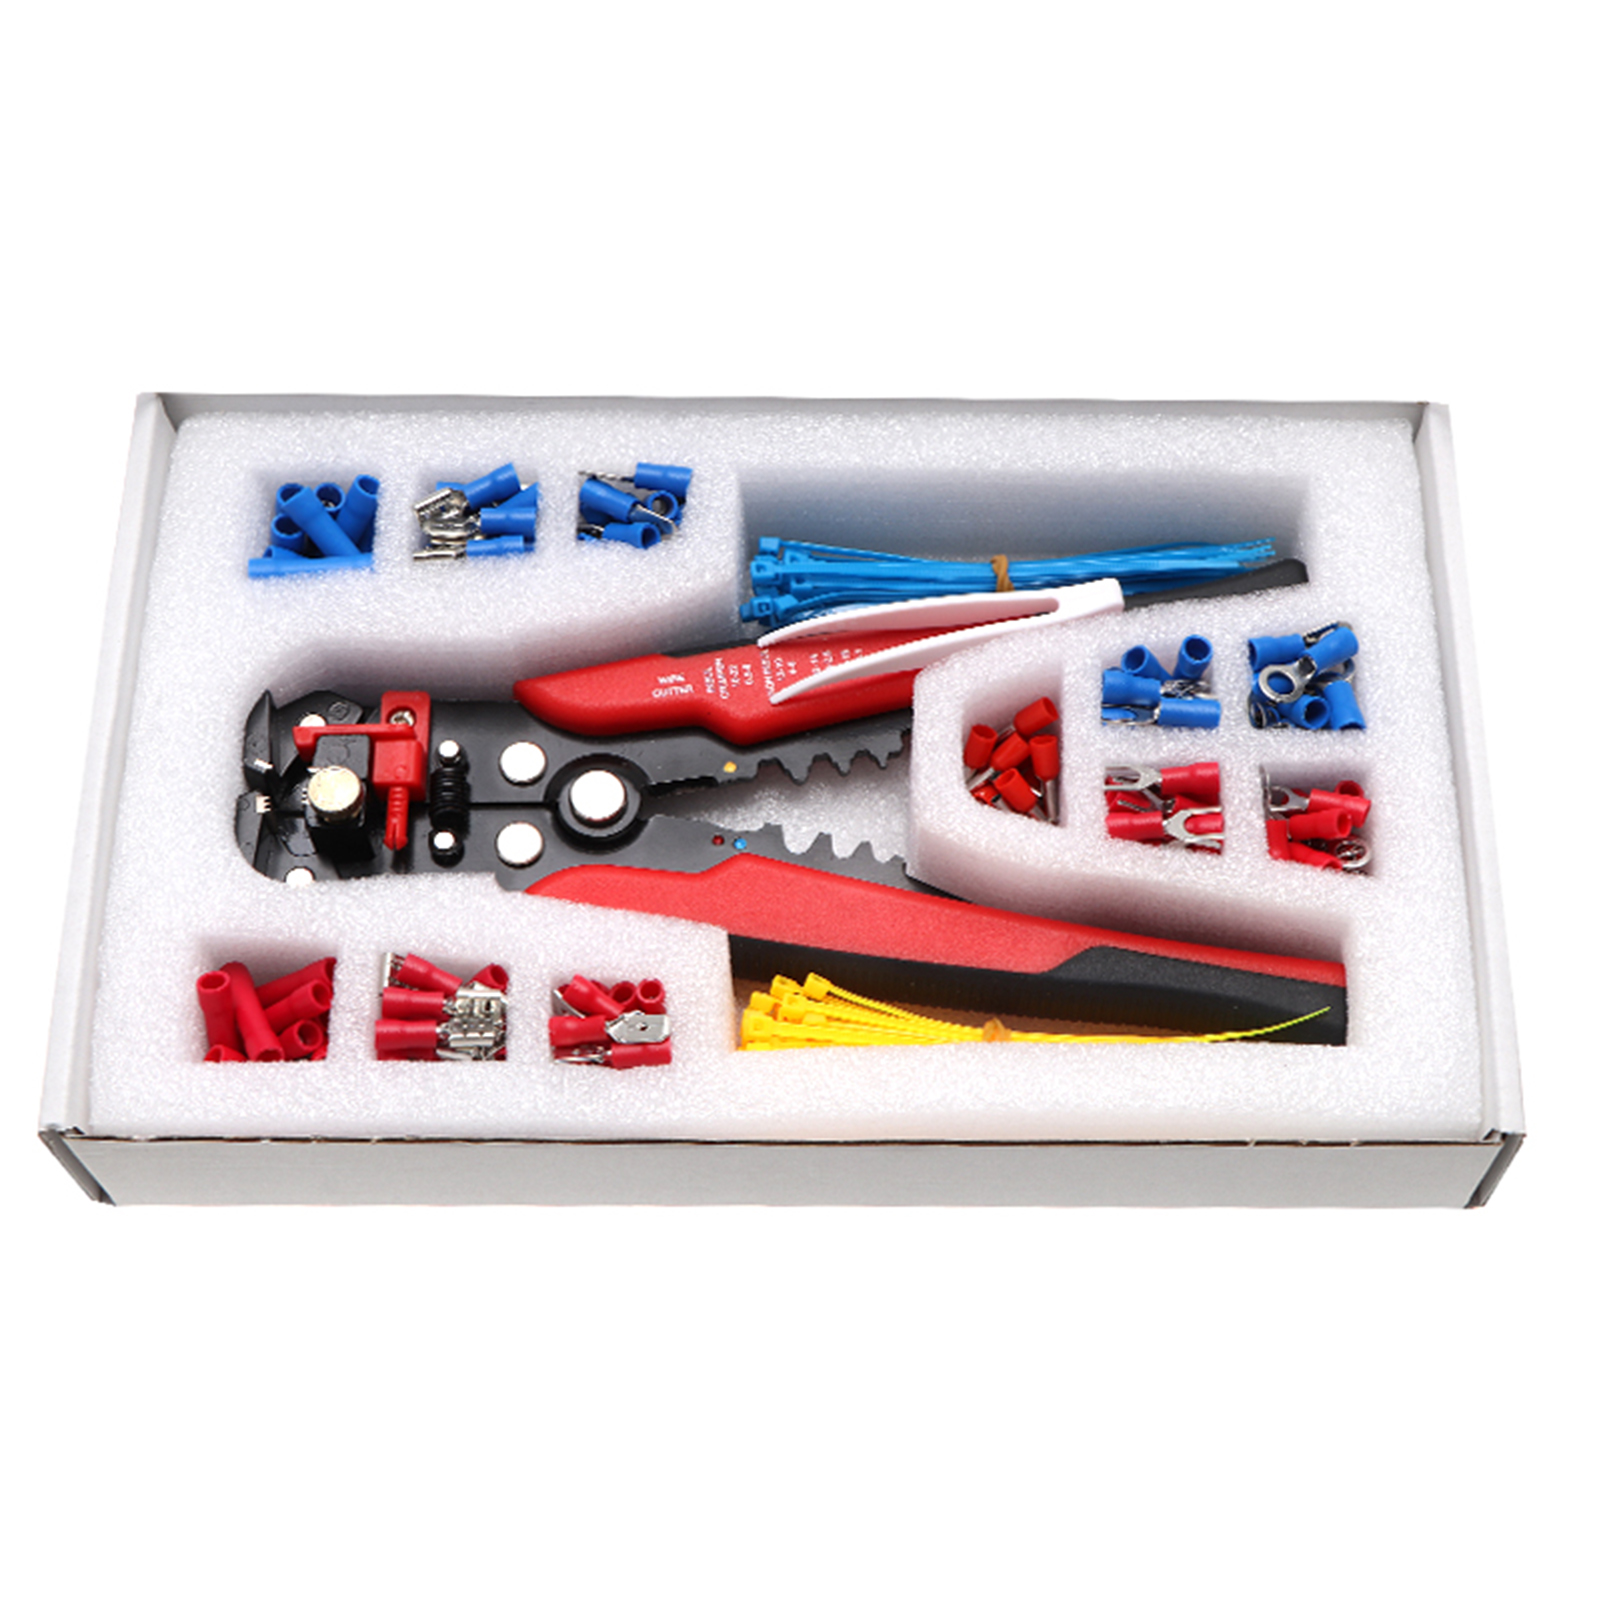 260PCS-Crimp-Cable-Terminals-Set-Kit-Heat-Shrink-Insulated-Wire-Electrical-Connector-Assorted-Box-wi-1918948-9